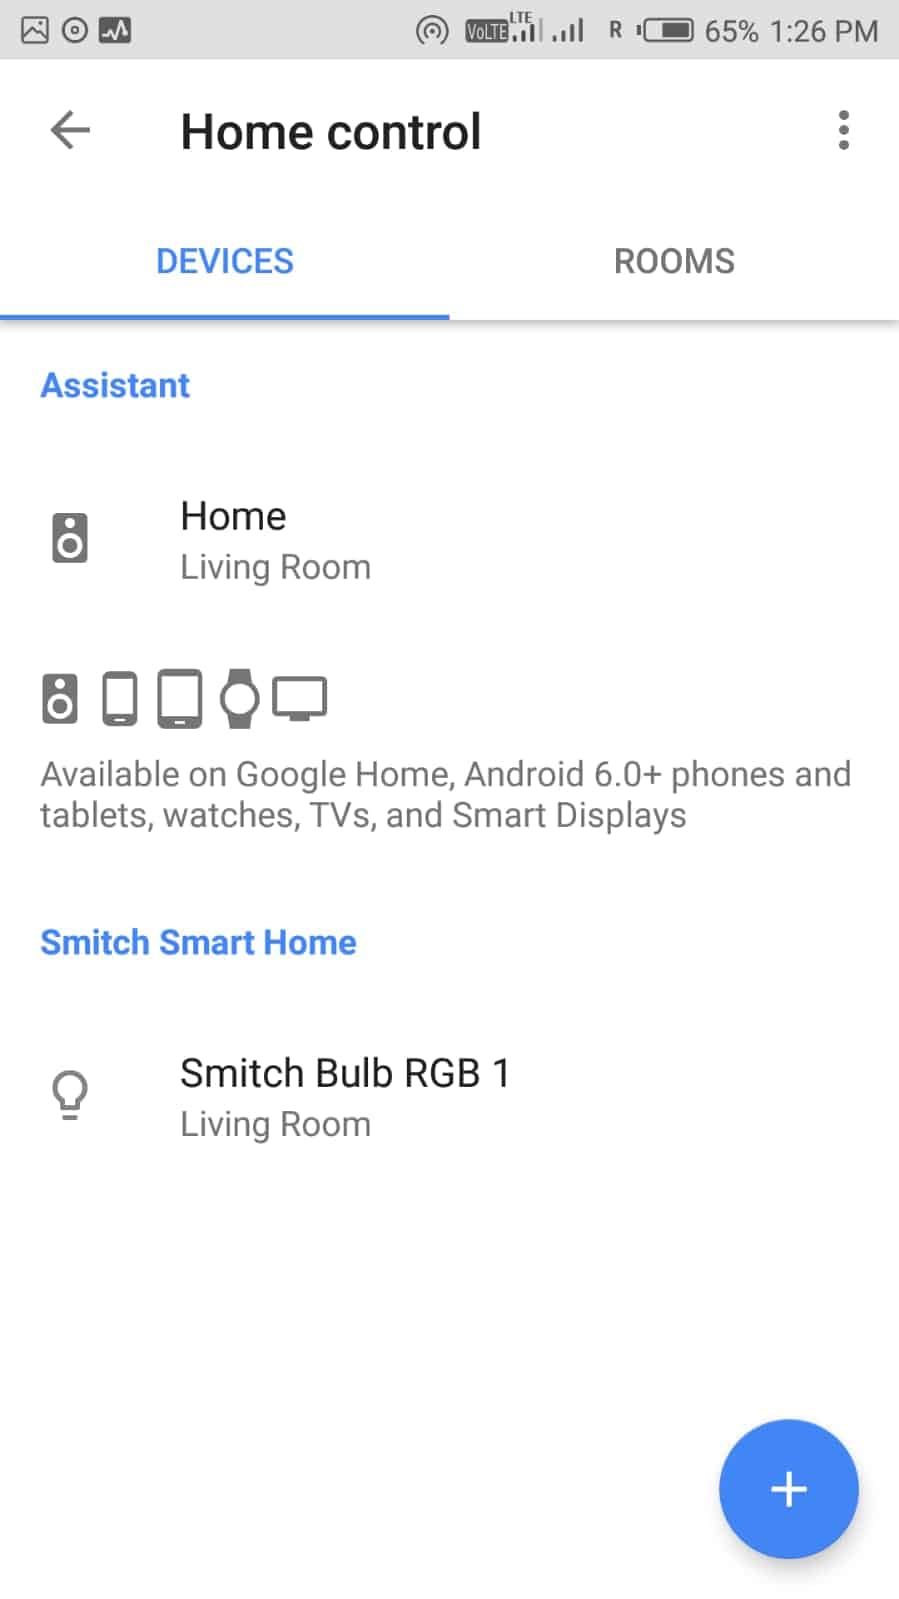 List of Connected smart home control devices in Google assistant